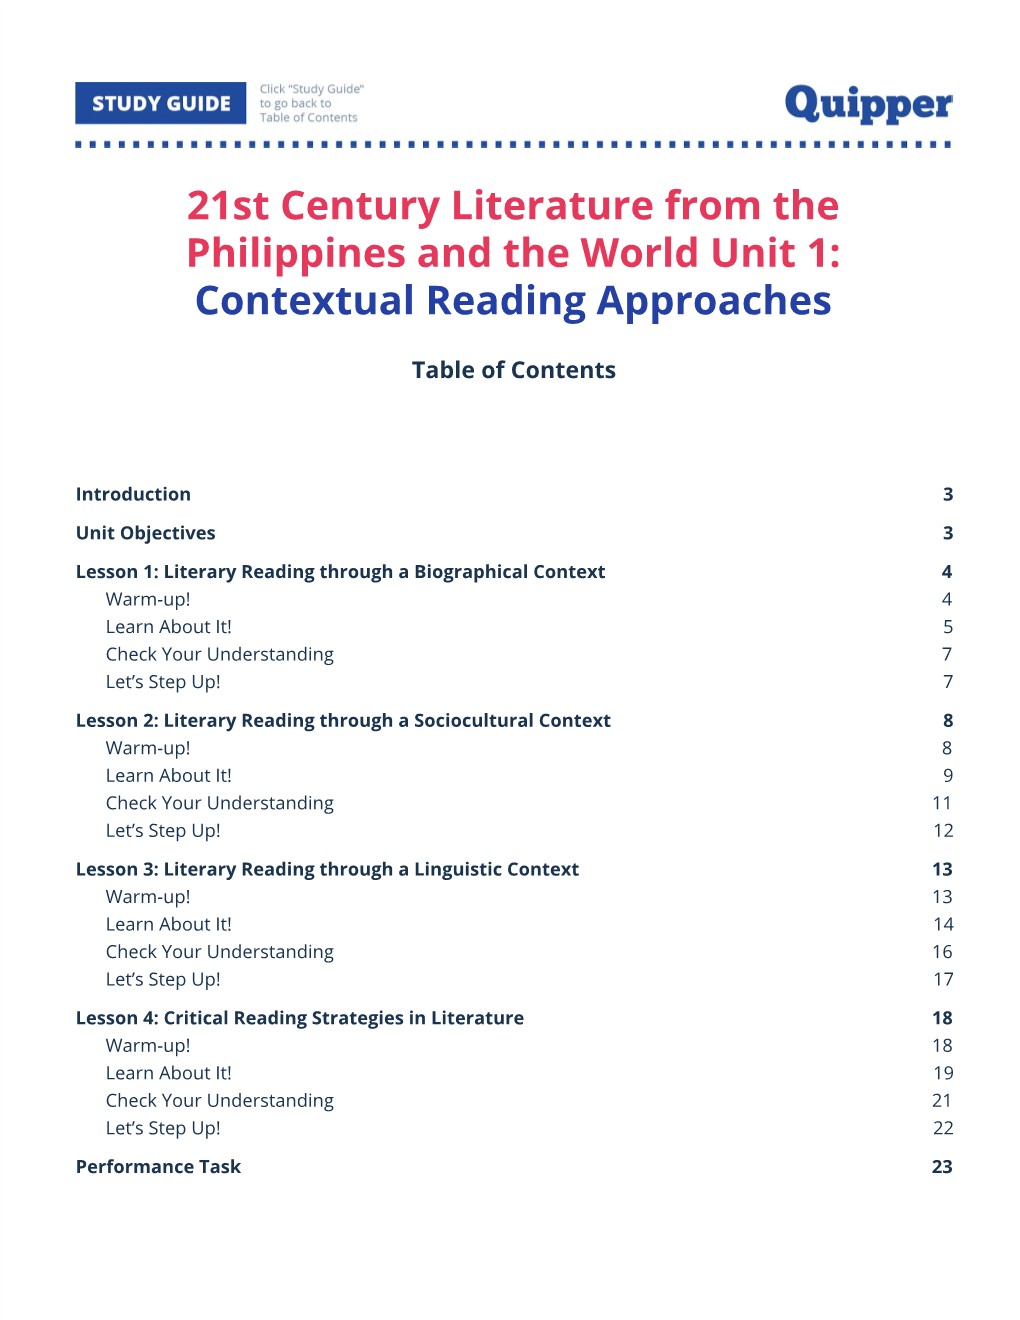 21St Century Literature from the Philippines and the World Unit 1: Contextual Reading Approaches